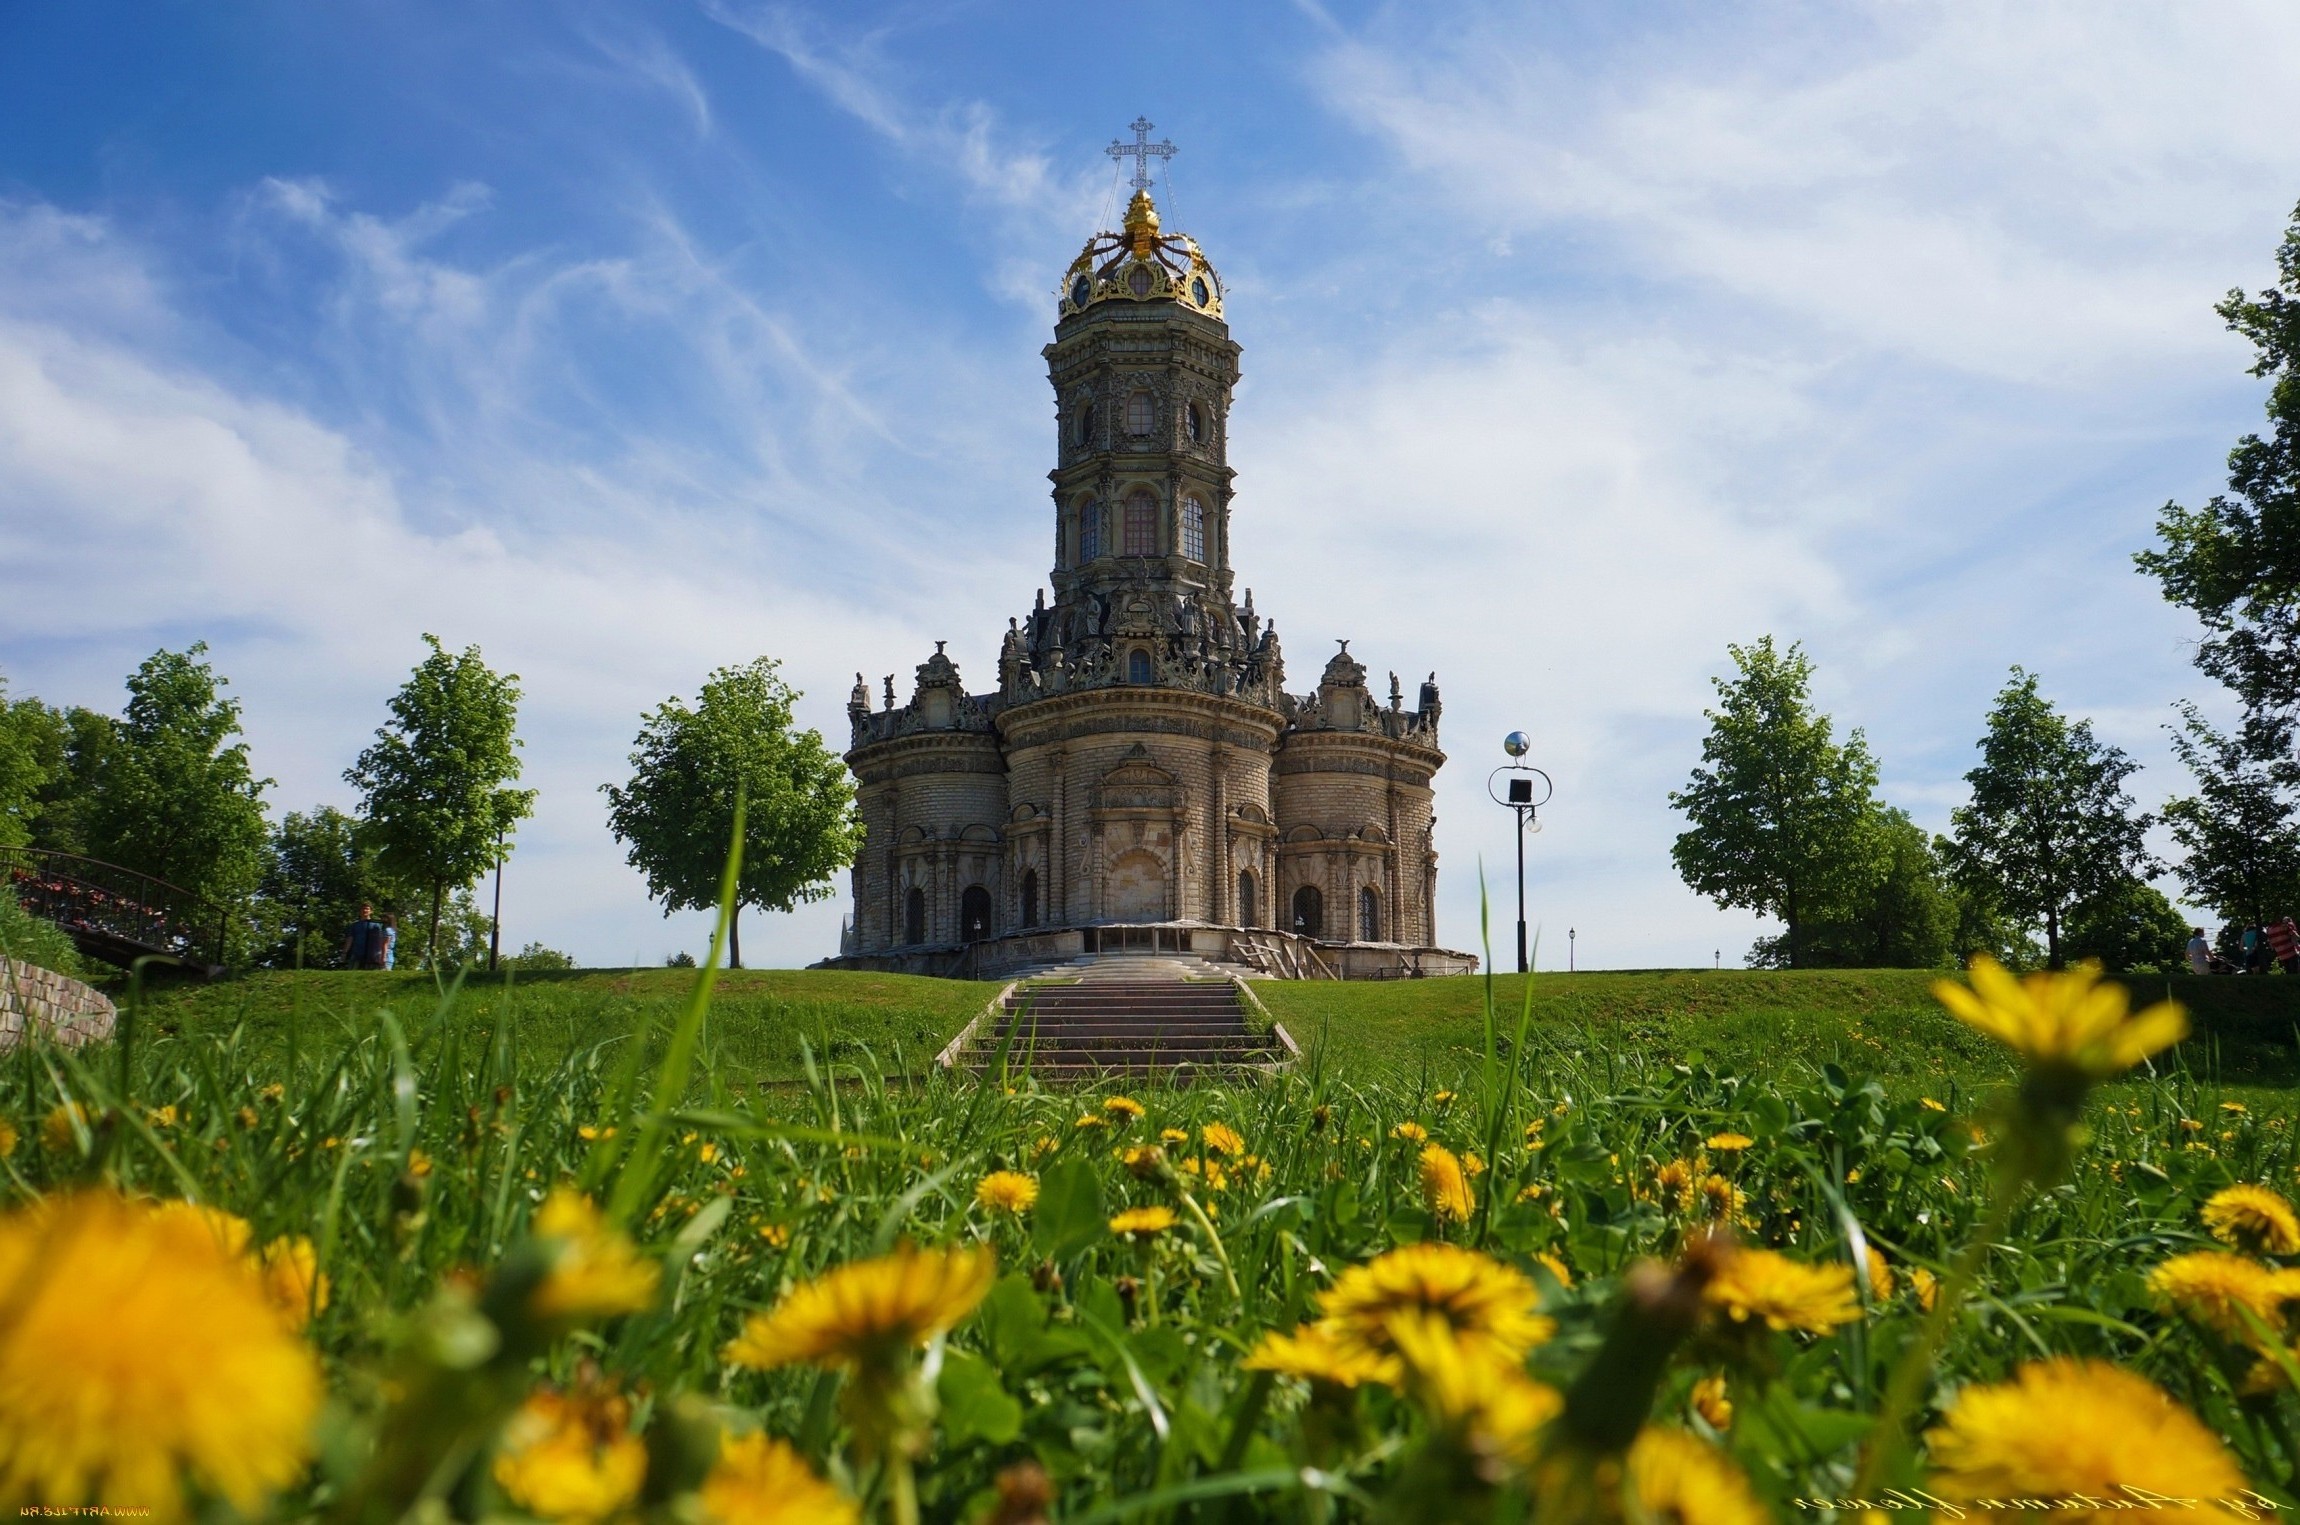 architecture, Nature, Landscape, Russia, Church, Sculpture, Stairs, Flowers, Grass, Field, Trees, Clouds Wallpaper